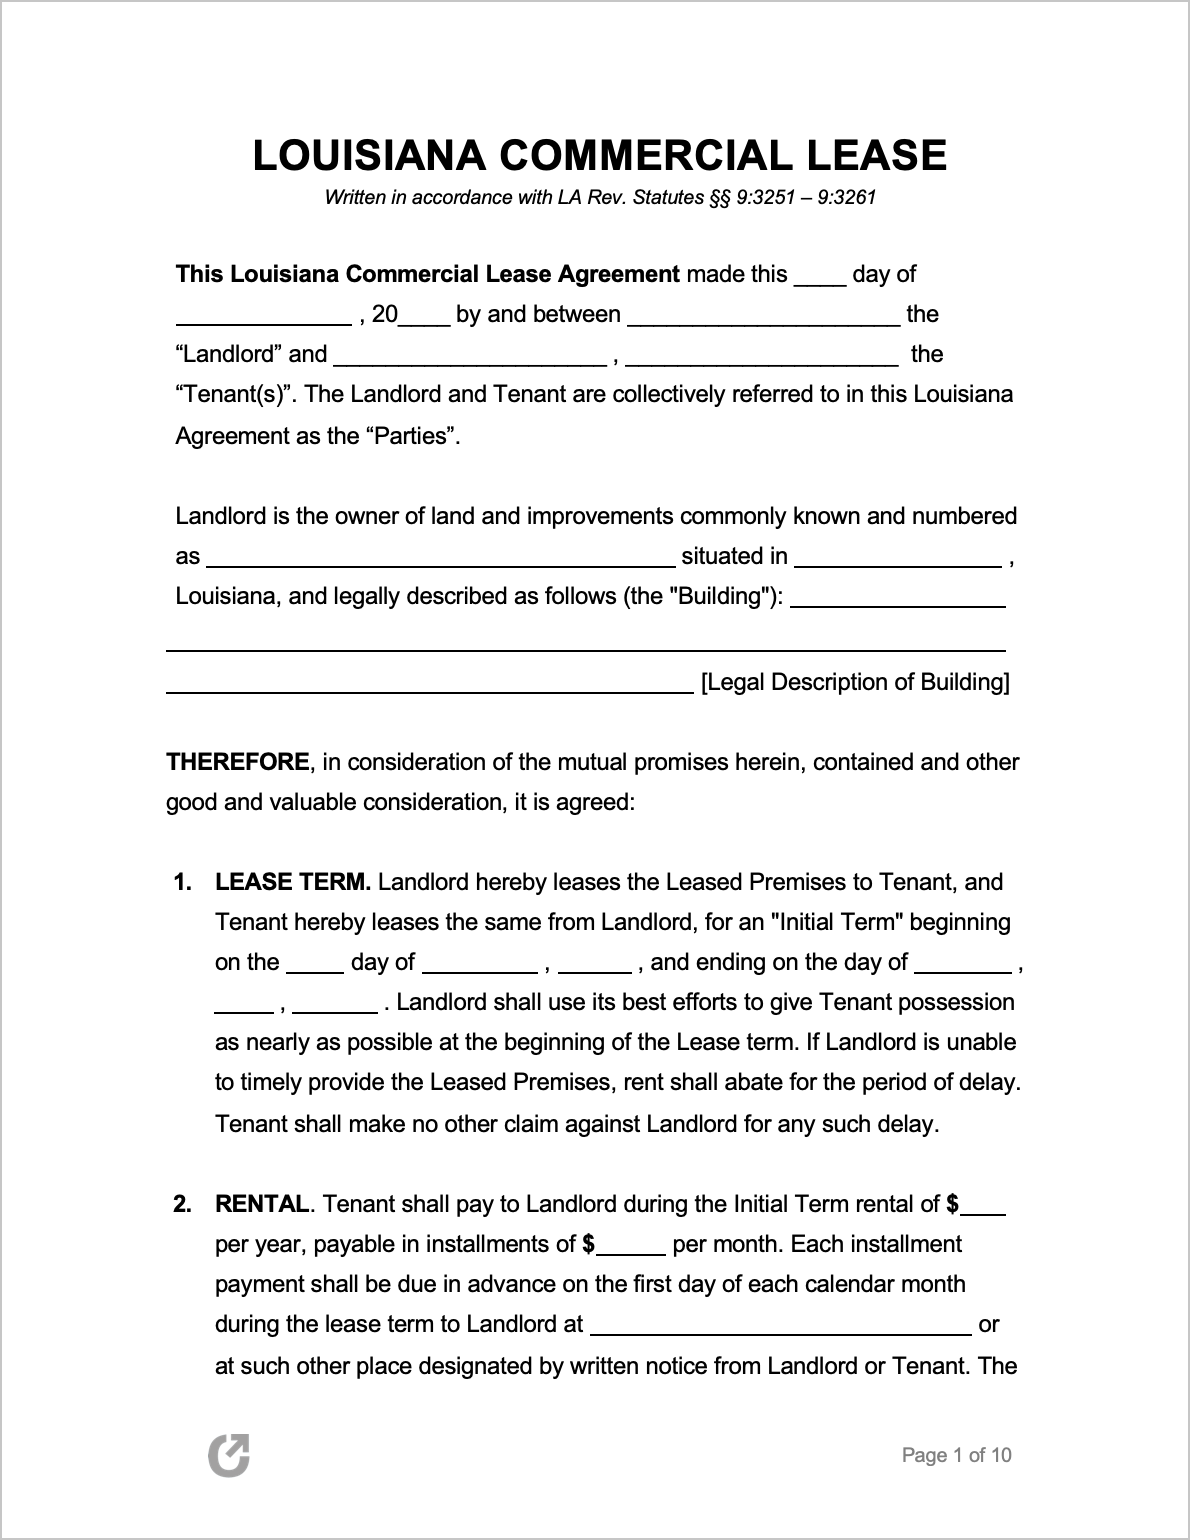 free louisiana commercial lease agreement pdf word